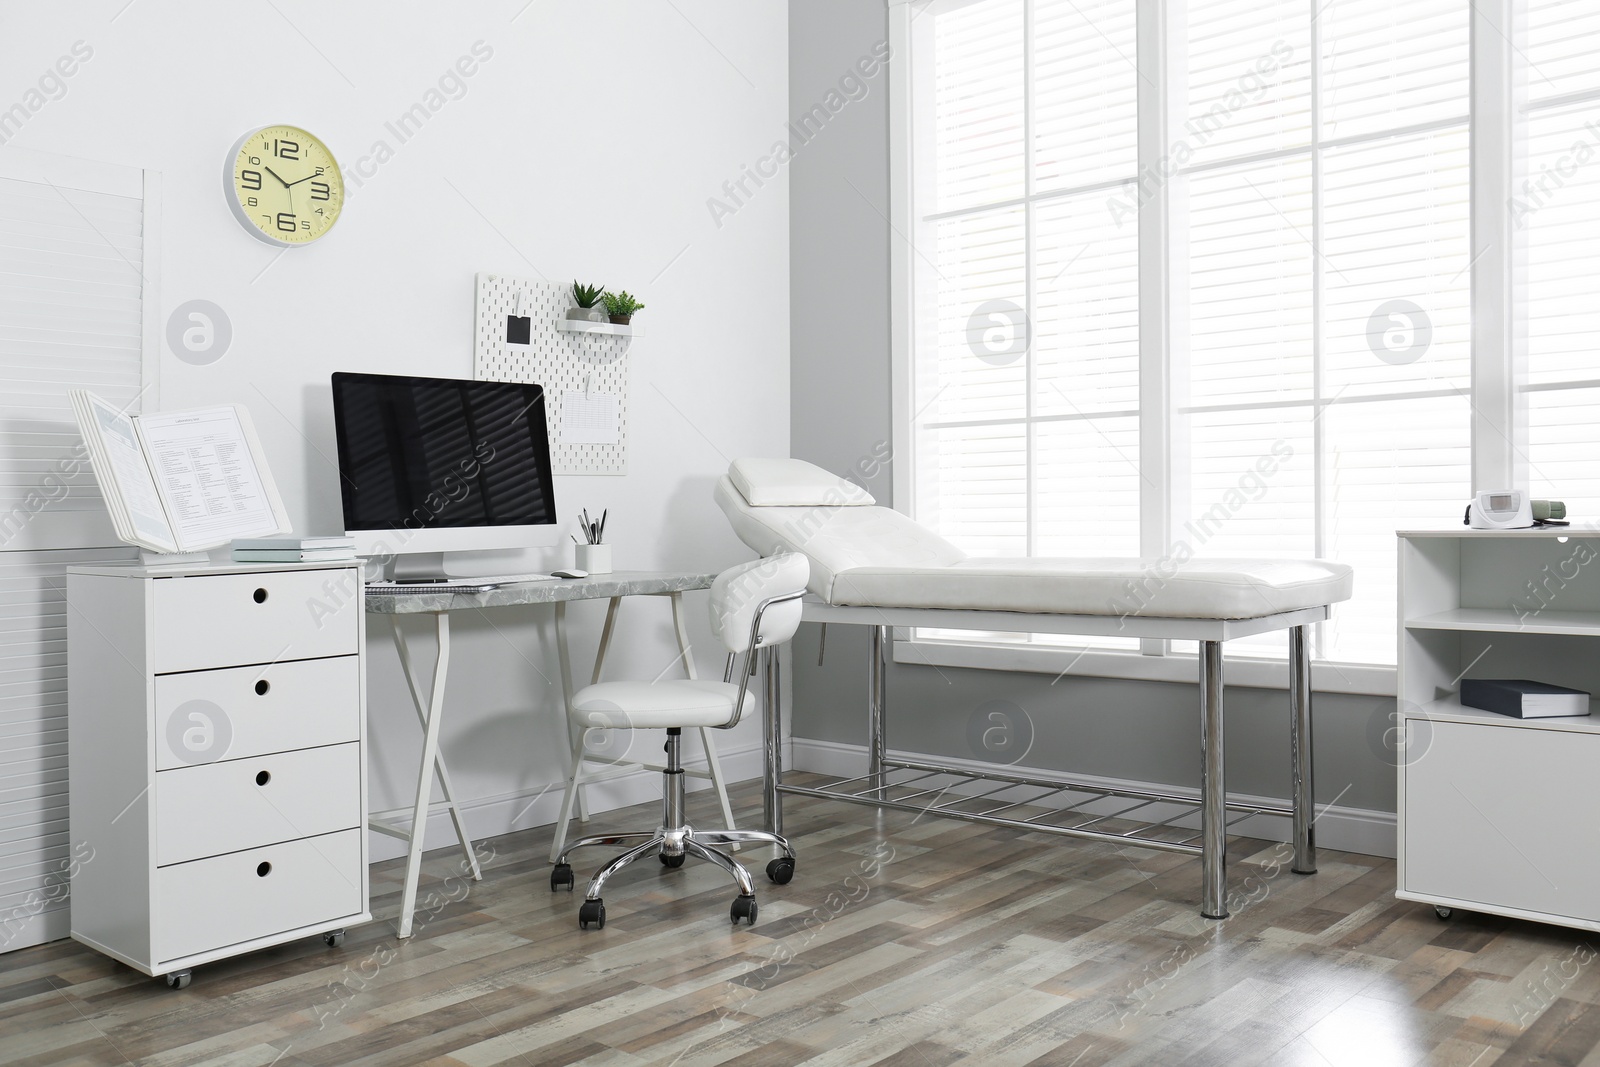 Photo of Modern medical office interior with computer and examination table